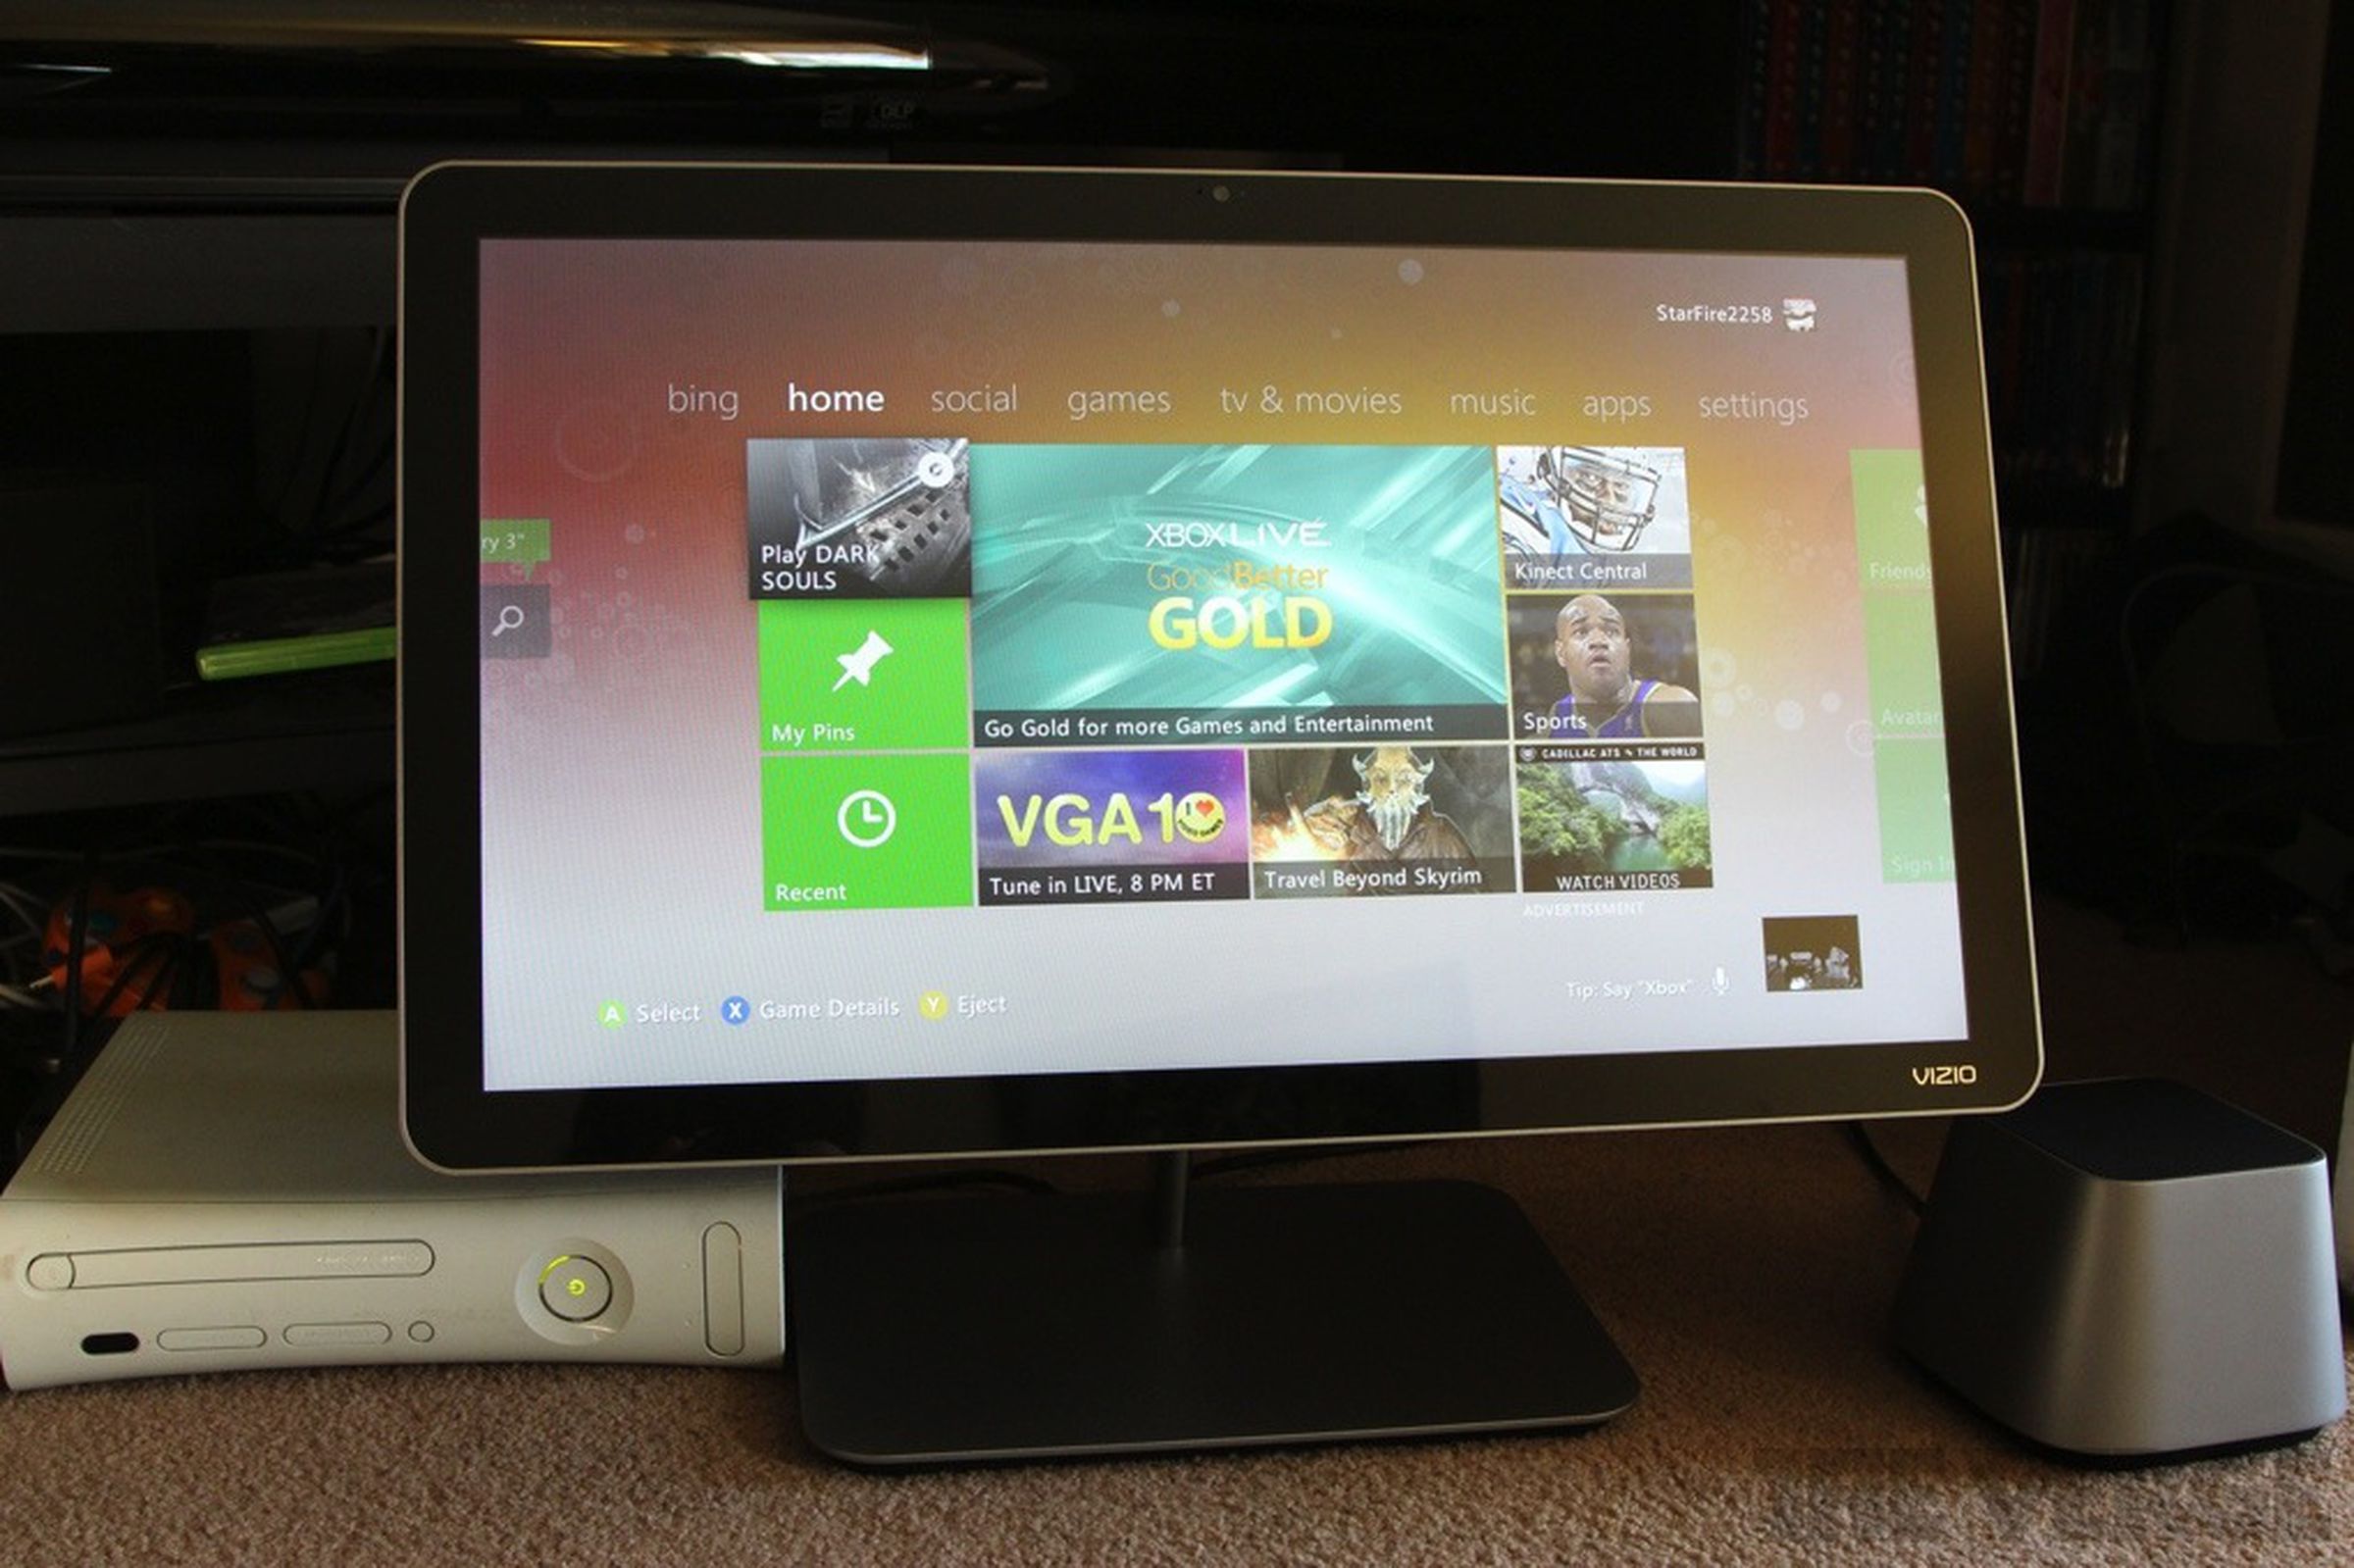 Vizio All-in-One Touch PC pictures